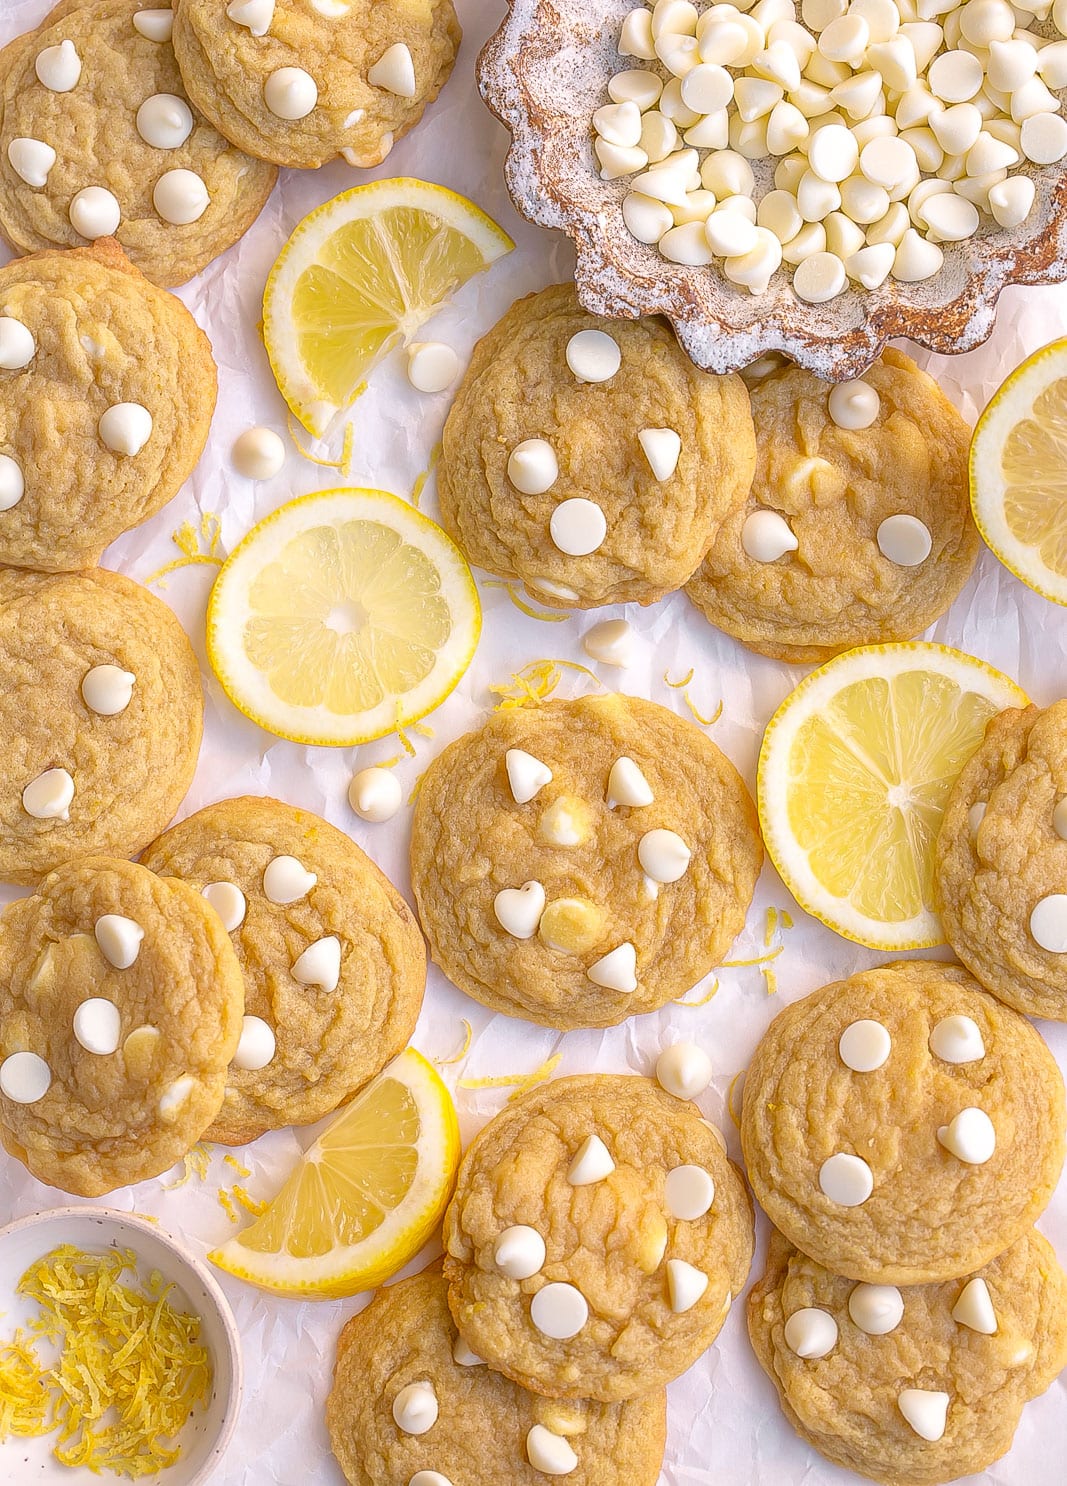 Batch of cookies with lemon.